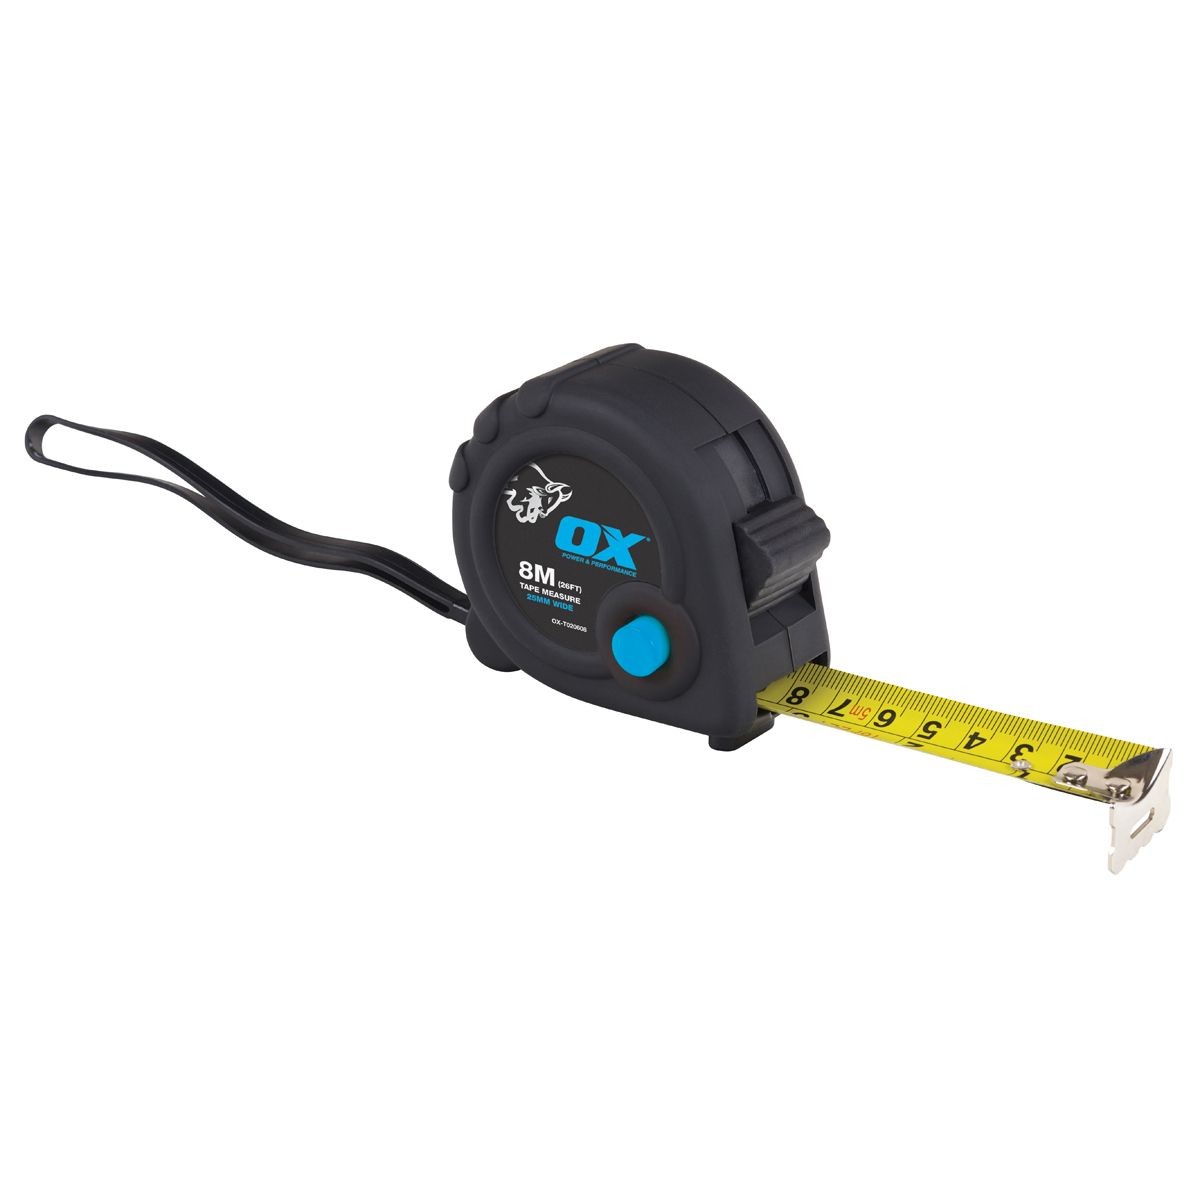 OX TOOLS - OX Trade Tape Measure 8Mtr  HILOXT020608